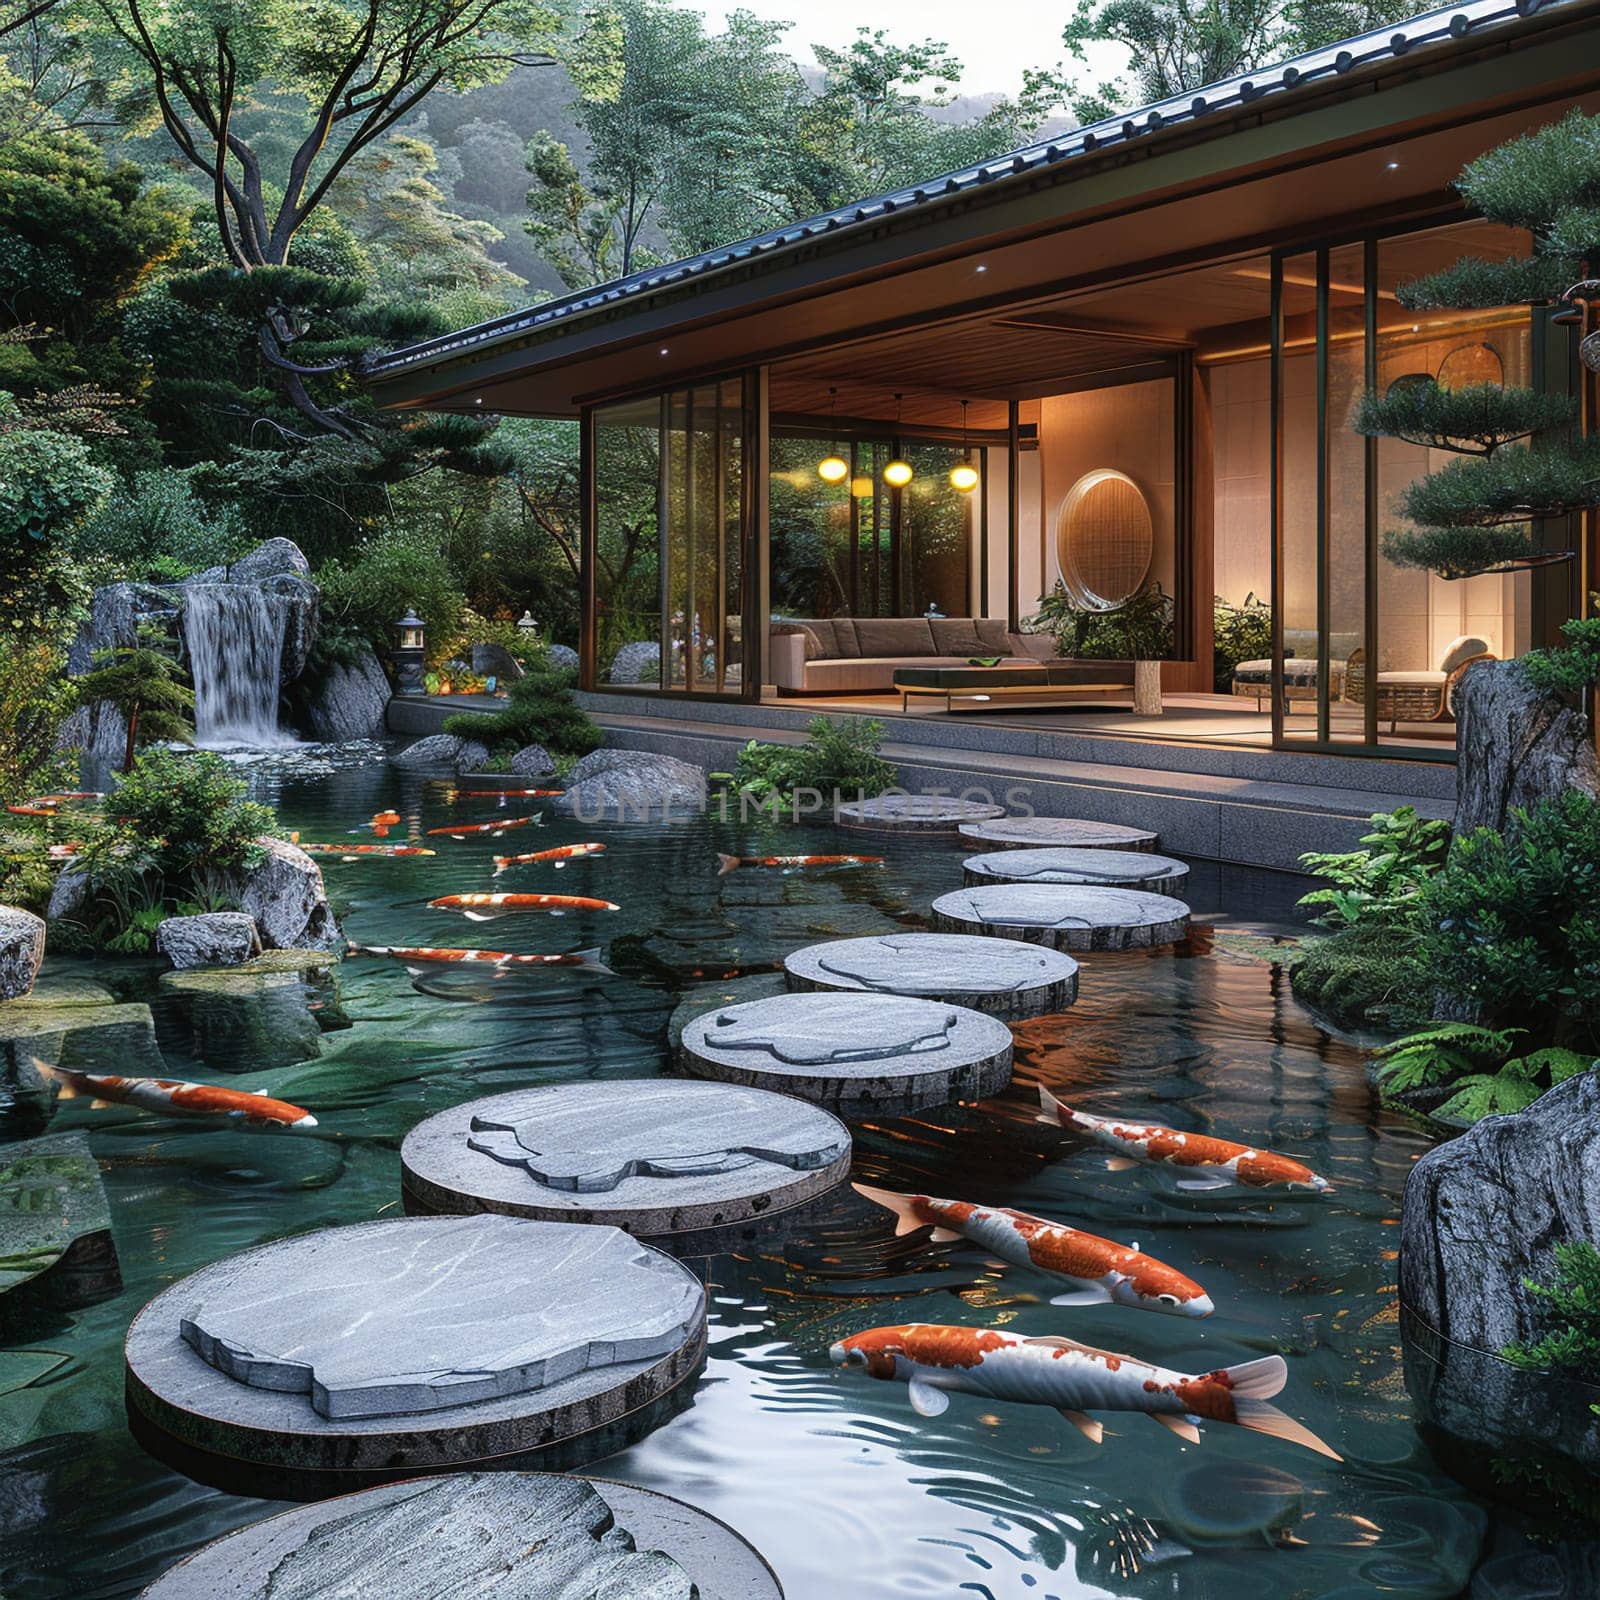 Tranquil Japanese koi pond garden with stepping stones and traditional tea house.3D render